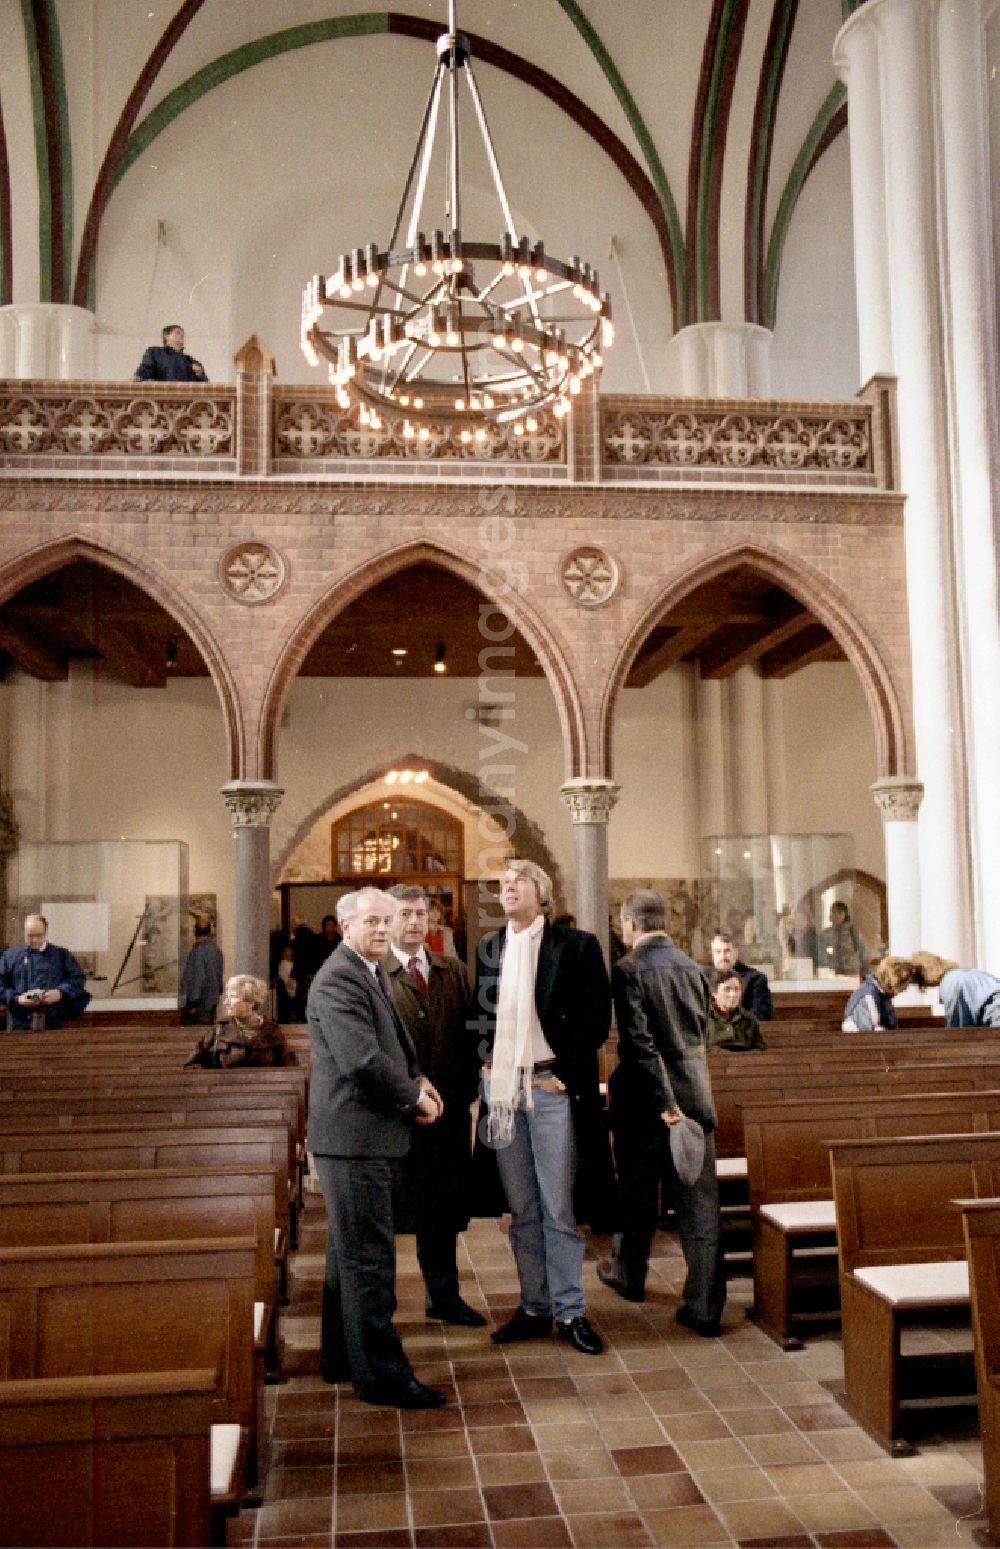 GDR photo archive: Berlin - Pop singer Roland Kaiser visits St. Nicholas Church in Berlin Eastberlin on the territory of the former GDR, German Democratic Republic